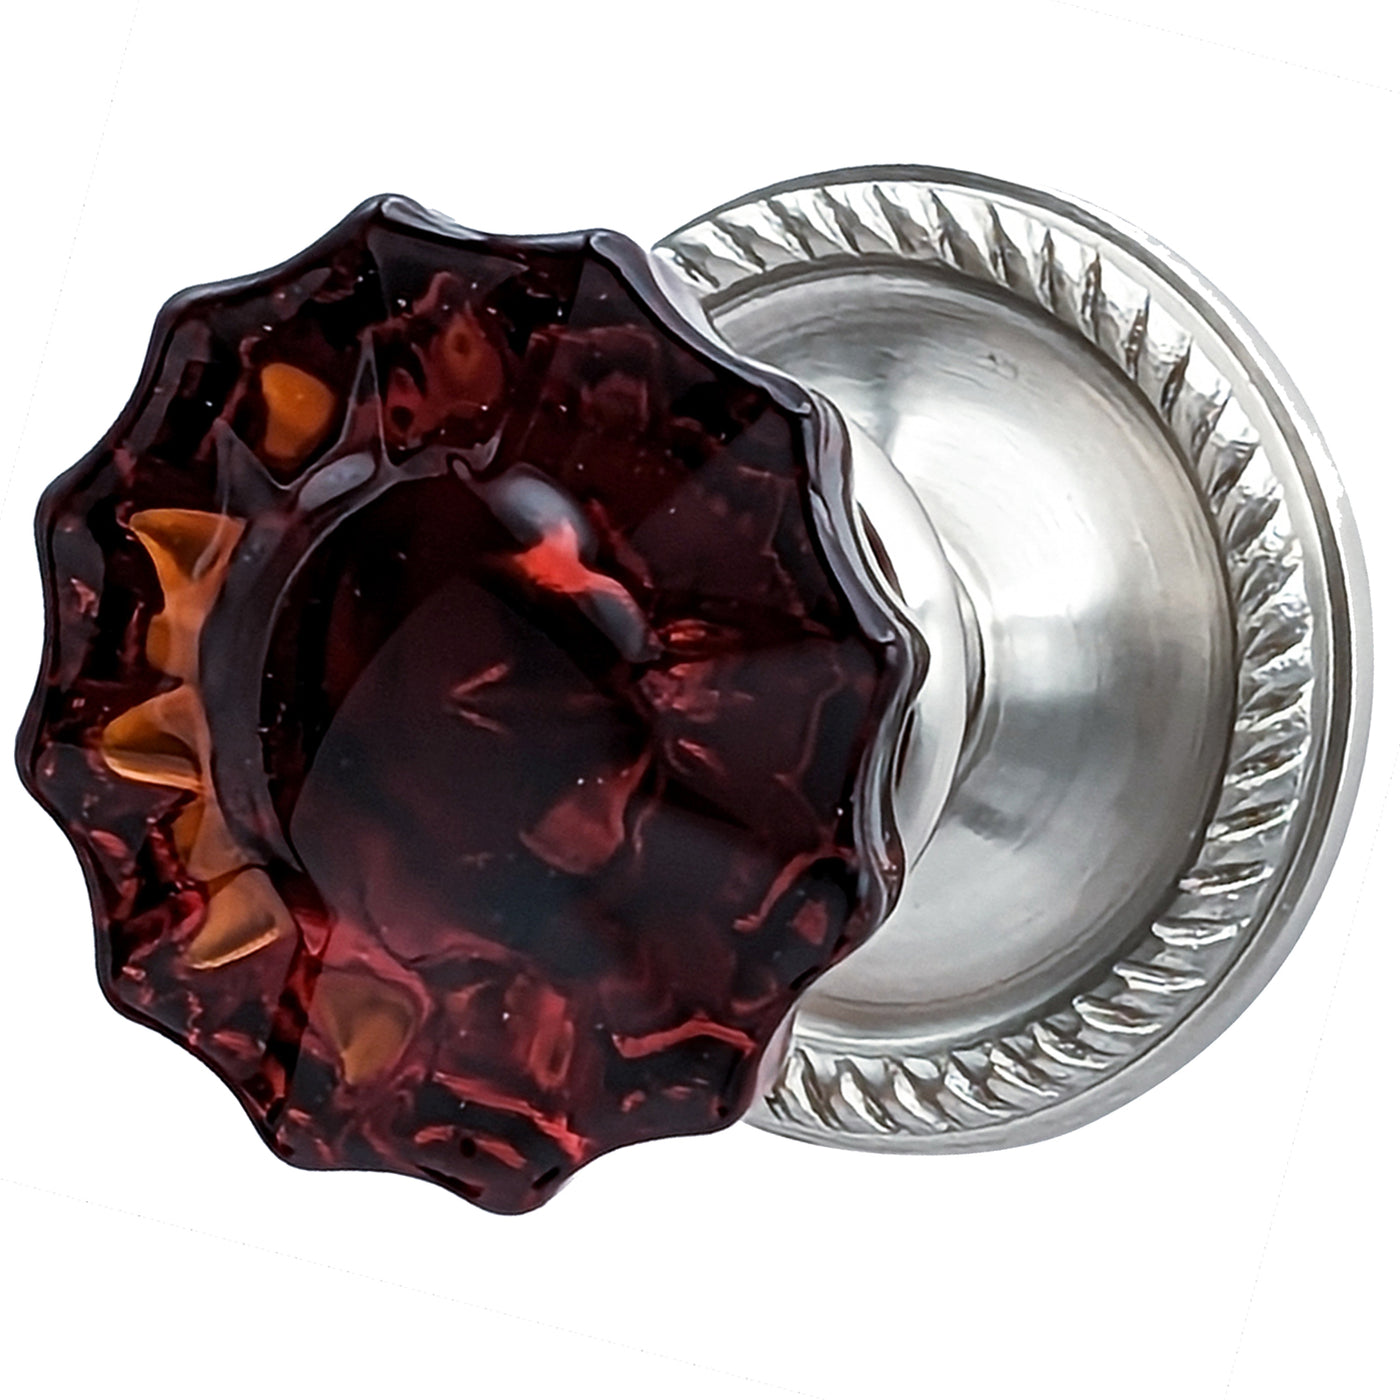 Amber Fluted Crystal Door Knob Set with Rope-Trimmed Rosettes